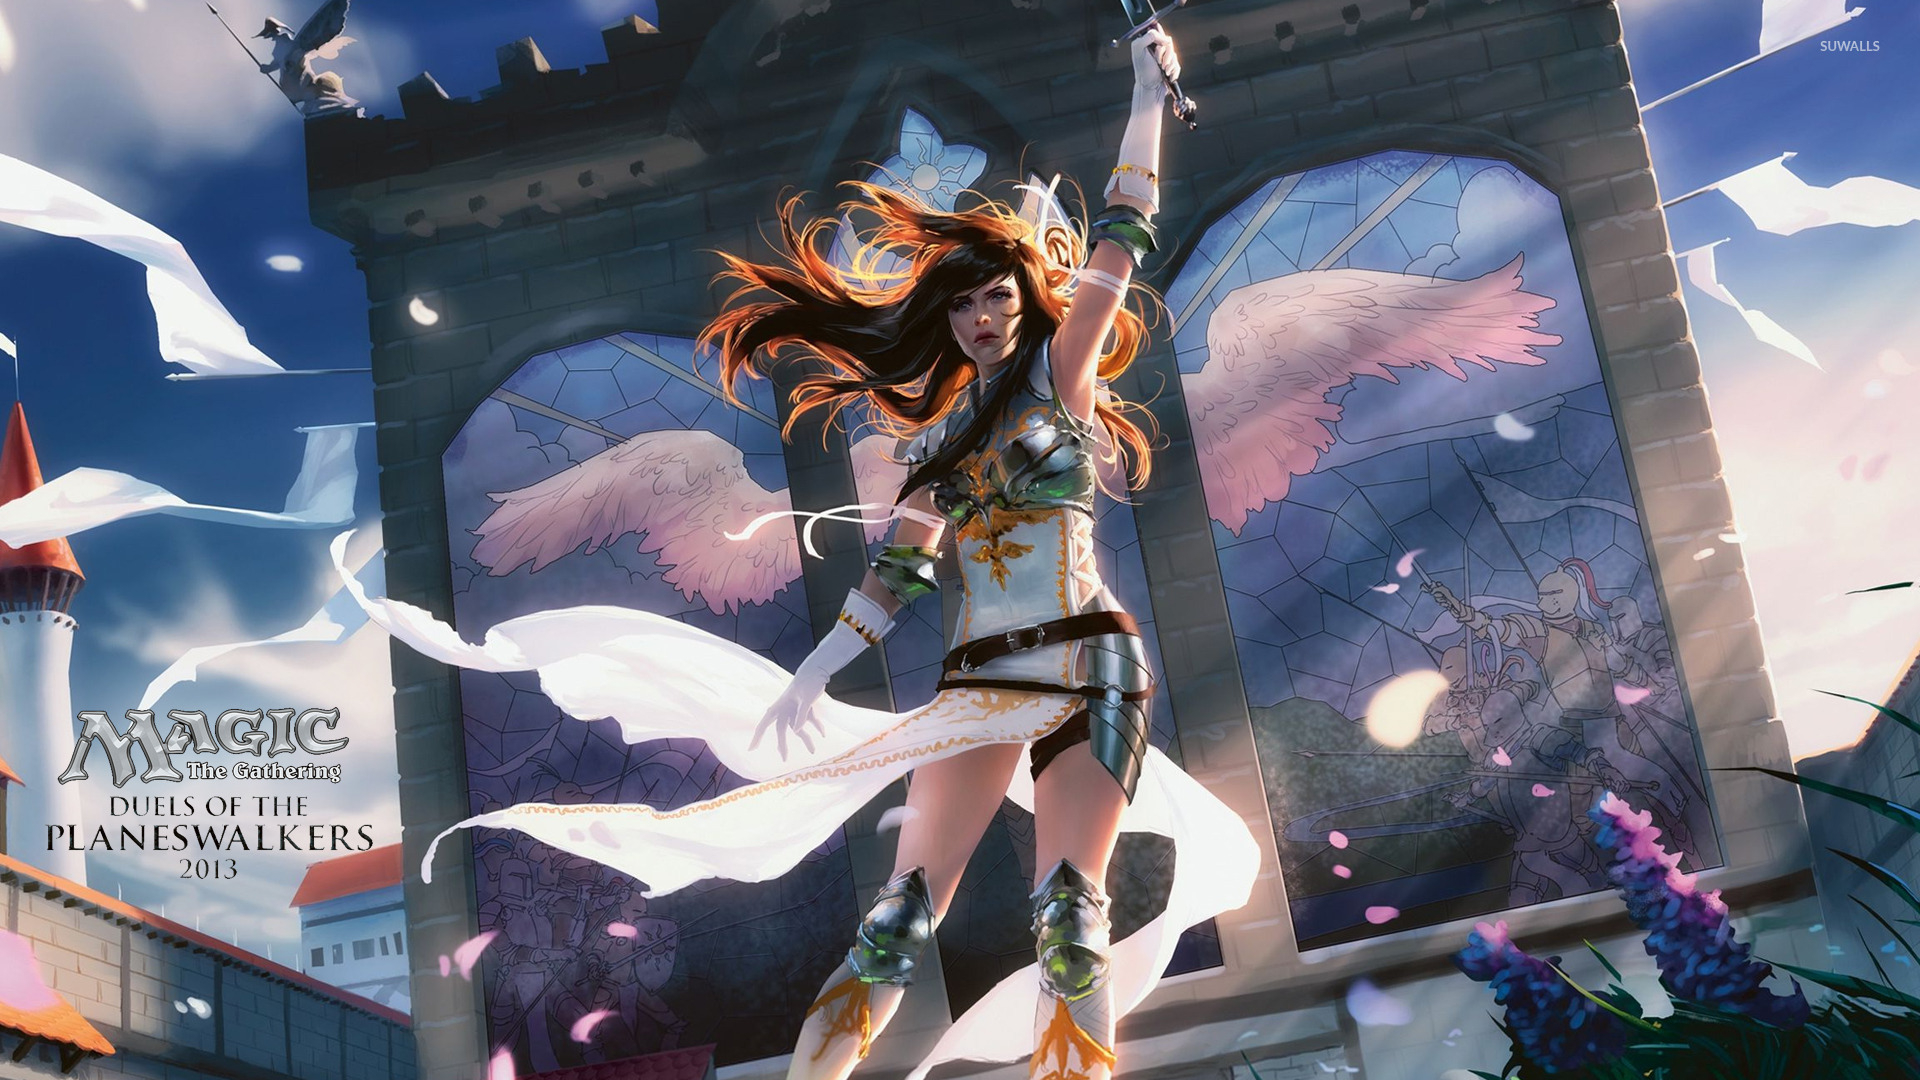 1920x1080 Free download Magic the Gathering Duels of the Planeswalkers Wallpapers [] for your Desktop, Mobile \u0026 Tablet | Explore 78+ Planeswalker Wallpaper | Magic The Gathering Wallpapers, MTG Wallpaper of the Week